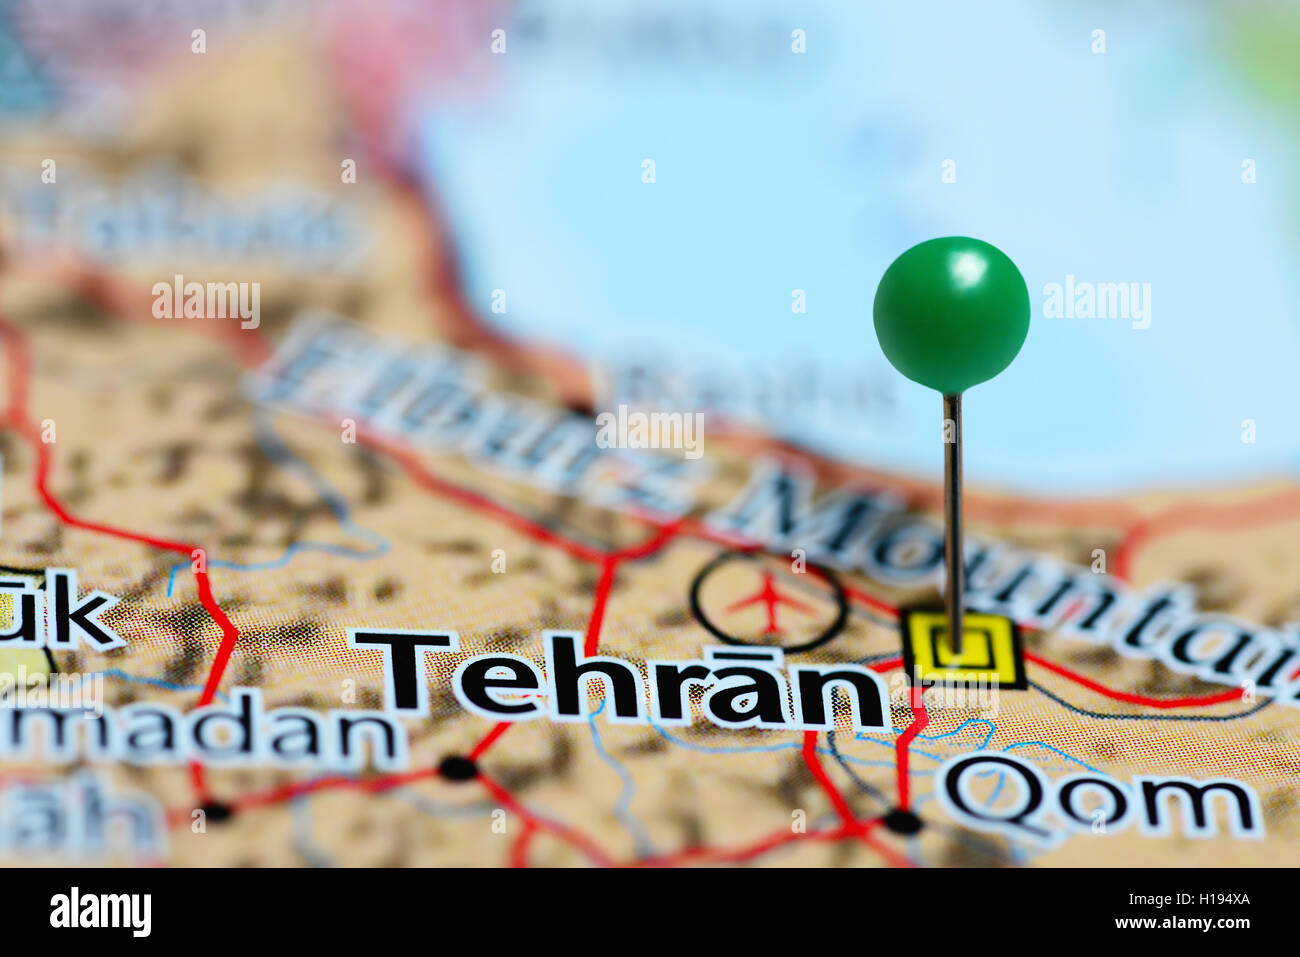 Tehran pinned on a map of Iran Stock Photo